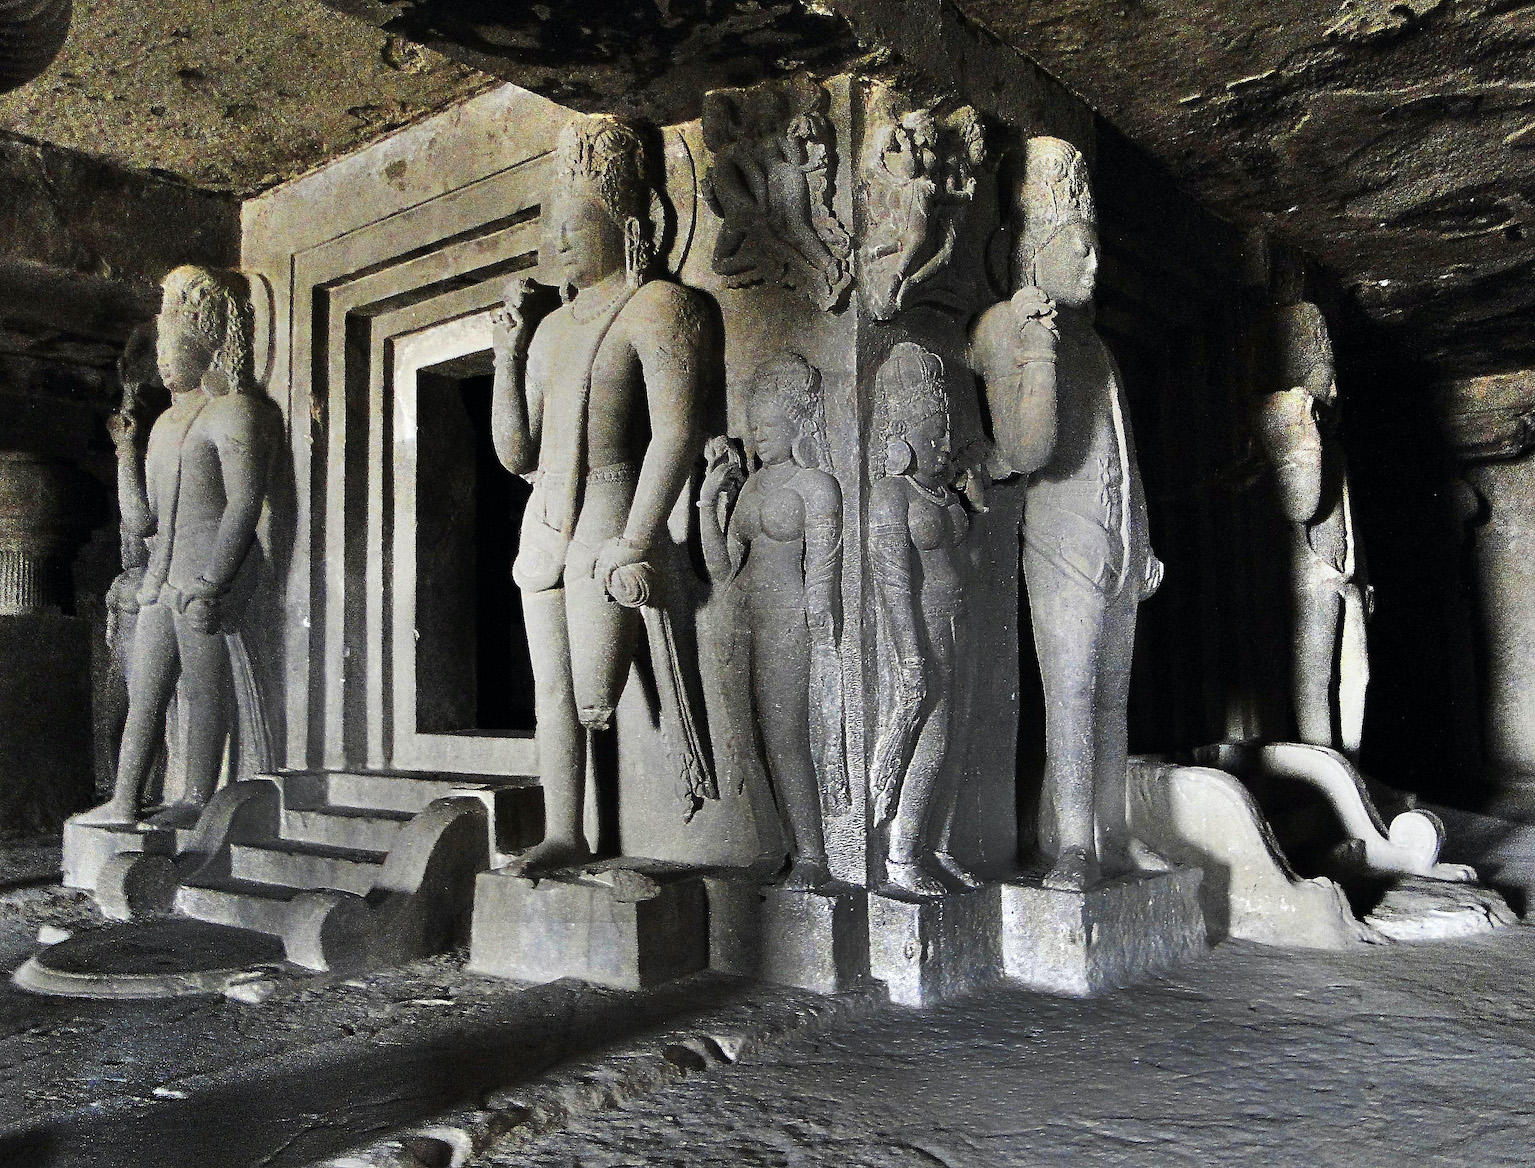 Figures stand besides the entry to a shrine inside a cave. Linga shrine in Cave 29, c. mid-6th century, Ellora (photo: Ronakshah1990, CC BY-SA 4.0)